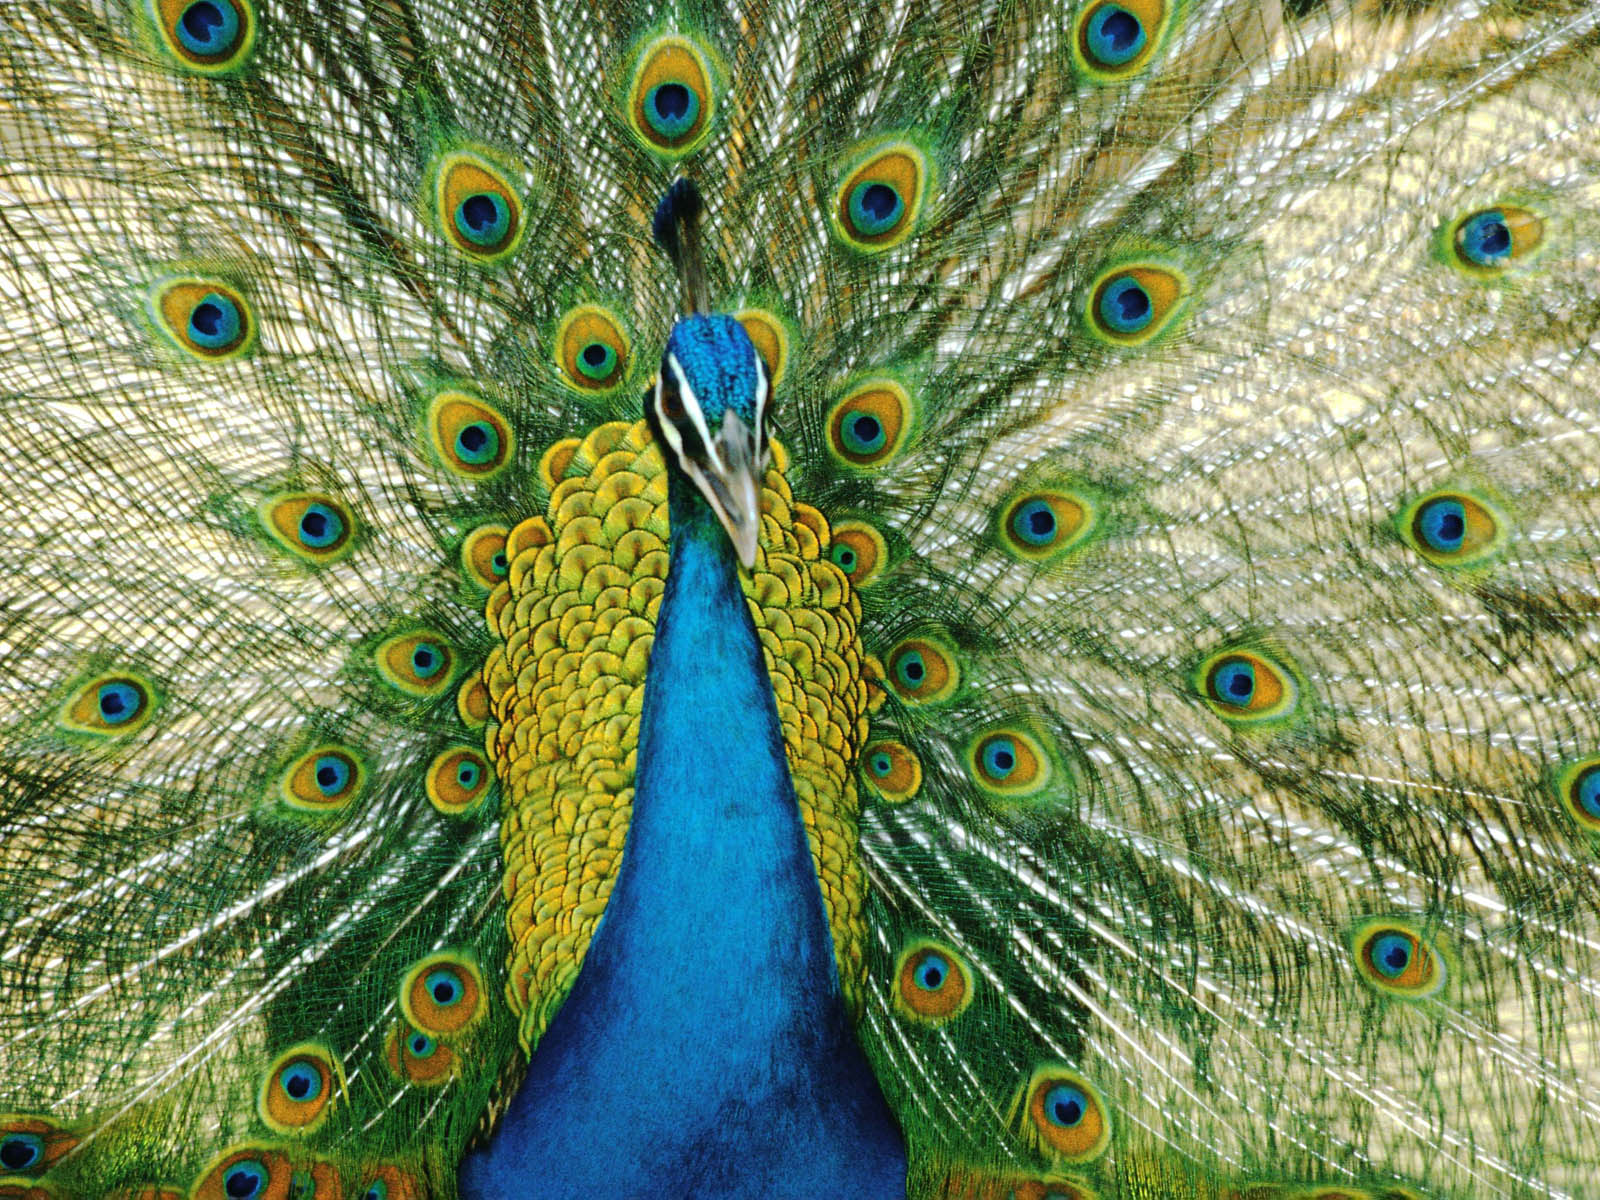 Tag Peacock Wallpaper Background Photos Image And Pictures For